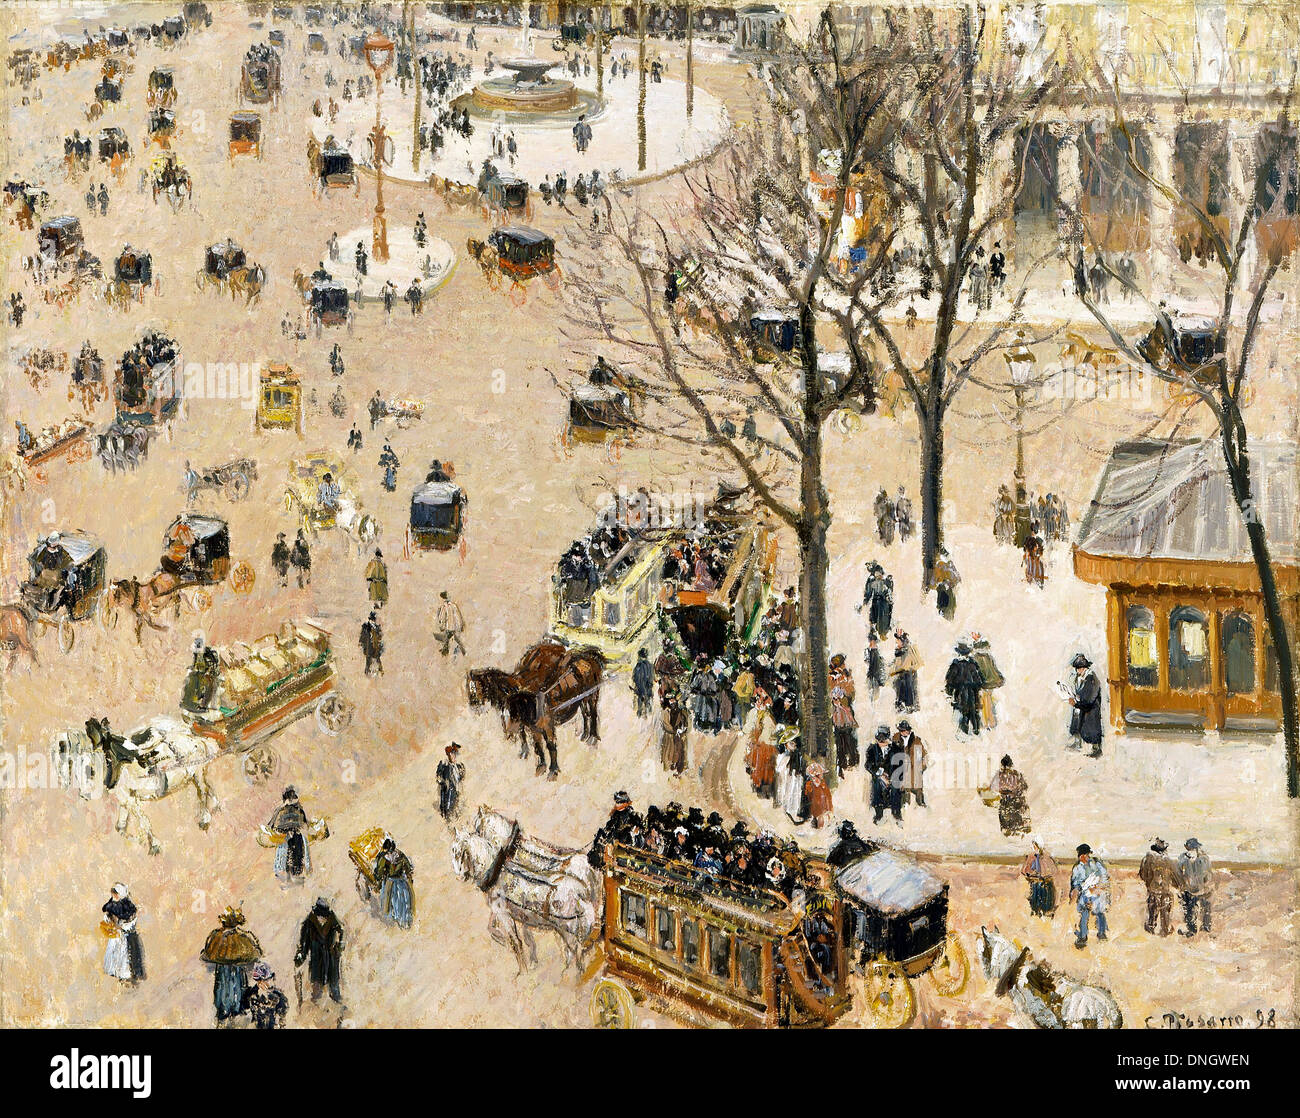 Camille Pissarro, Place du Theatre Francais 1898 Oil on canvas. Los Angeles County Museum of Art, Los Angeles, USA. Stock Photo